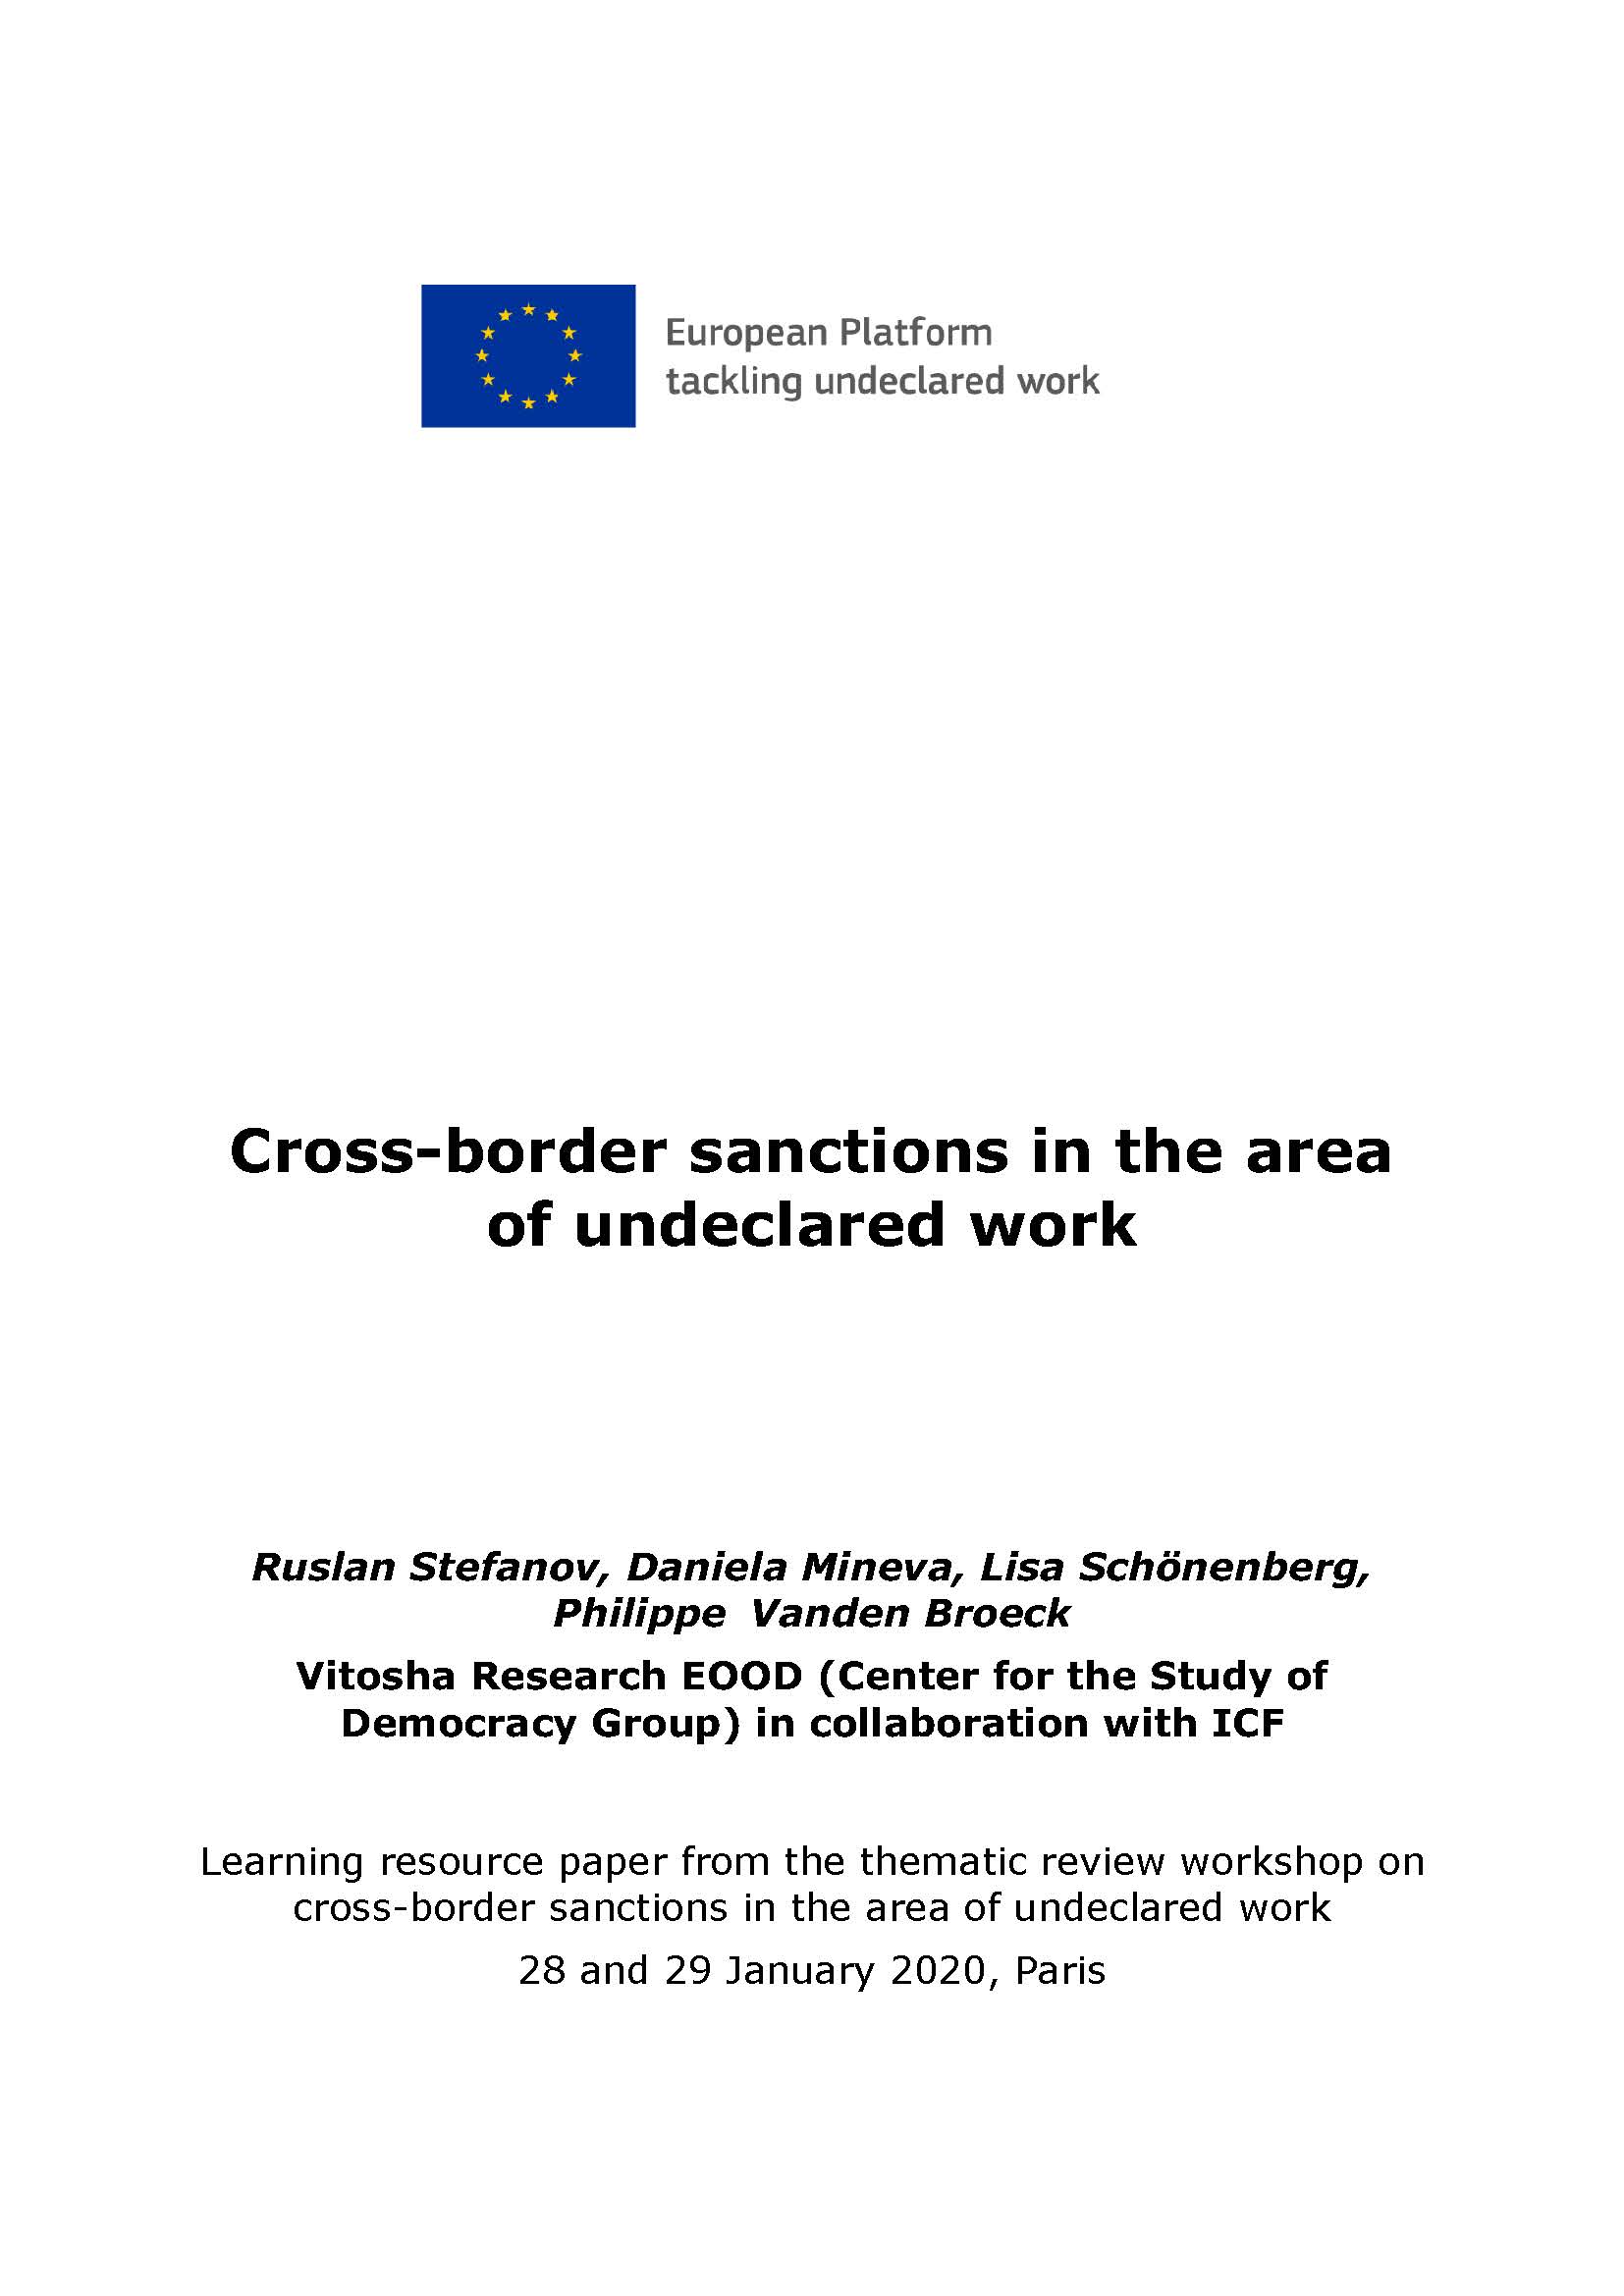 Cross-border sanctions in the area of undeclared work Cover Image